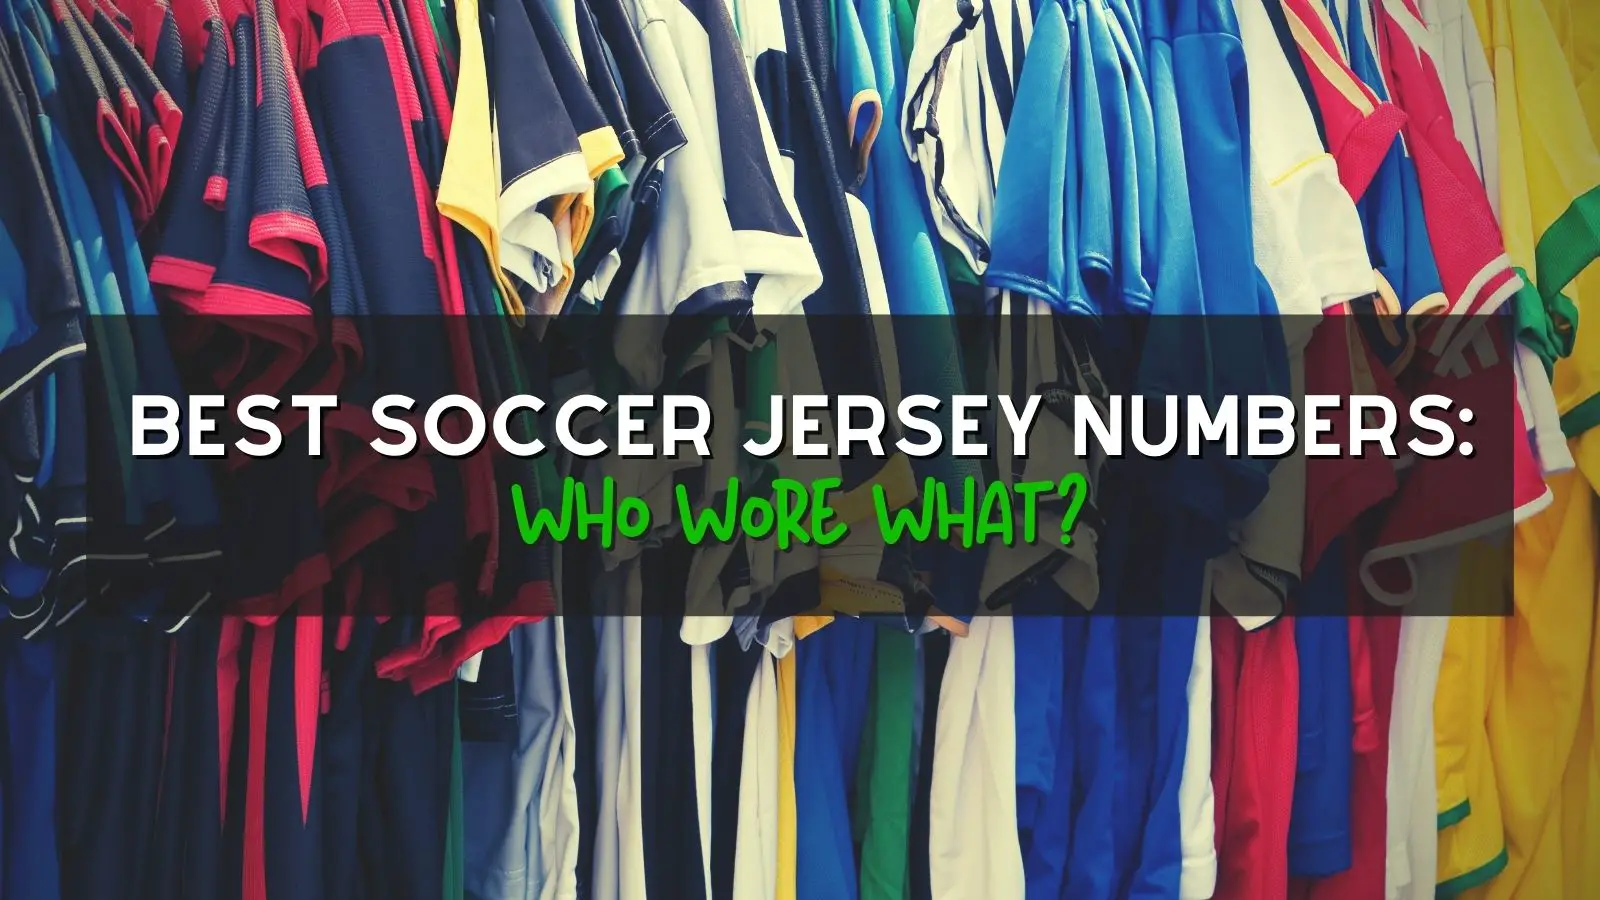 best soccer jersey Who Wore What?